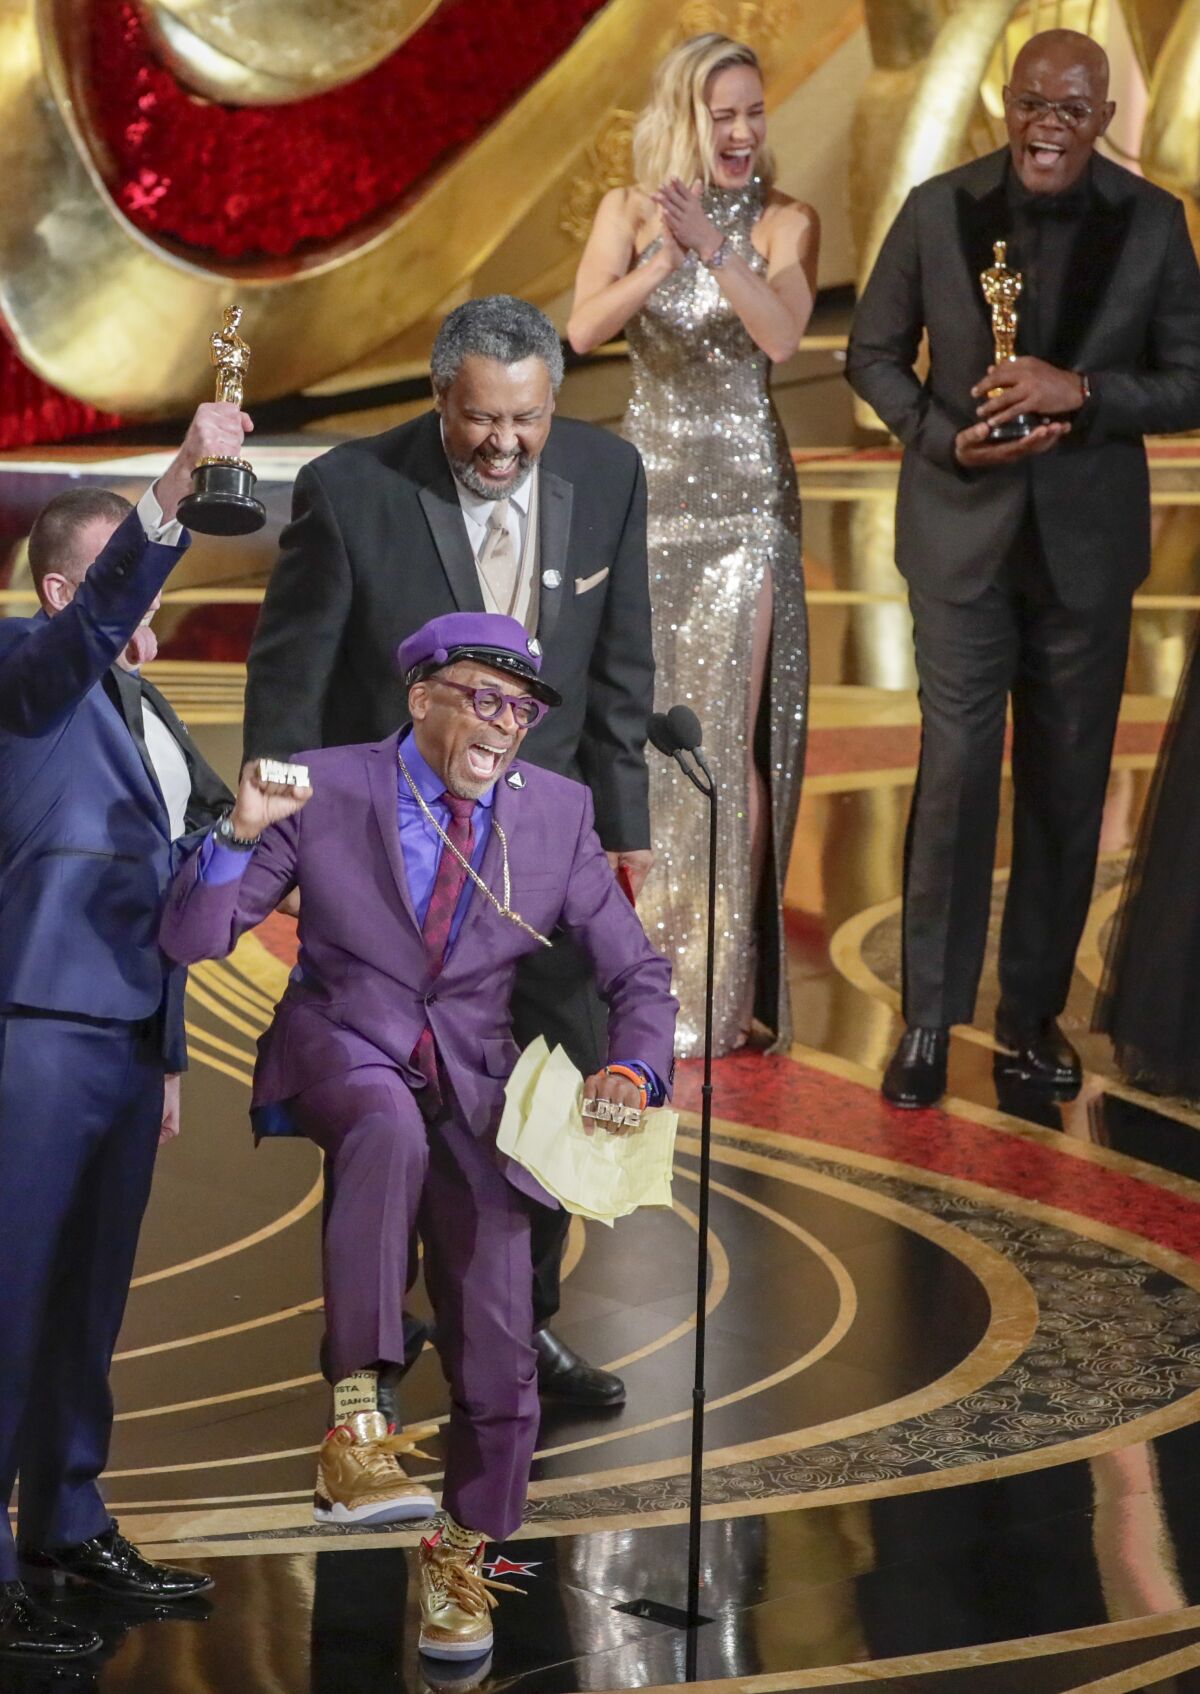 Spike Lee, in purple suit, reacts joyously after winning his first Oscar, presented by Brie Larson and Samuel L. Jackson, off to the right.